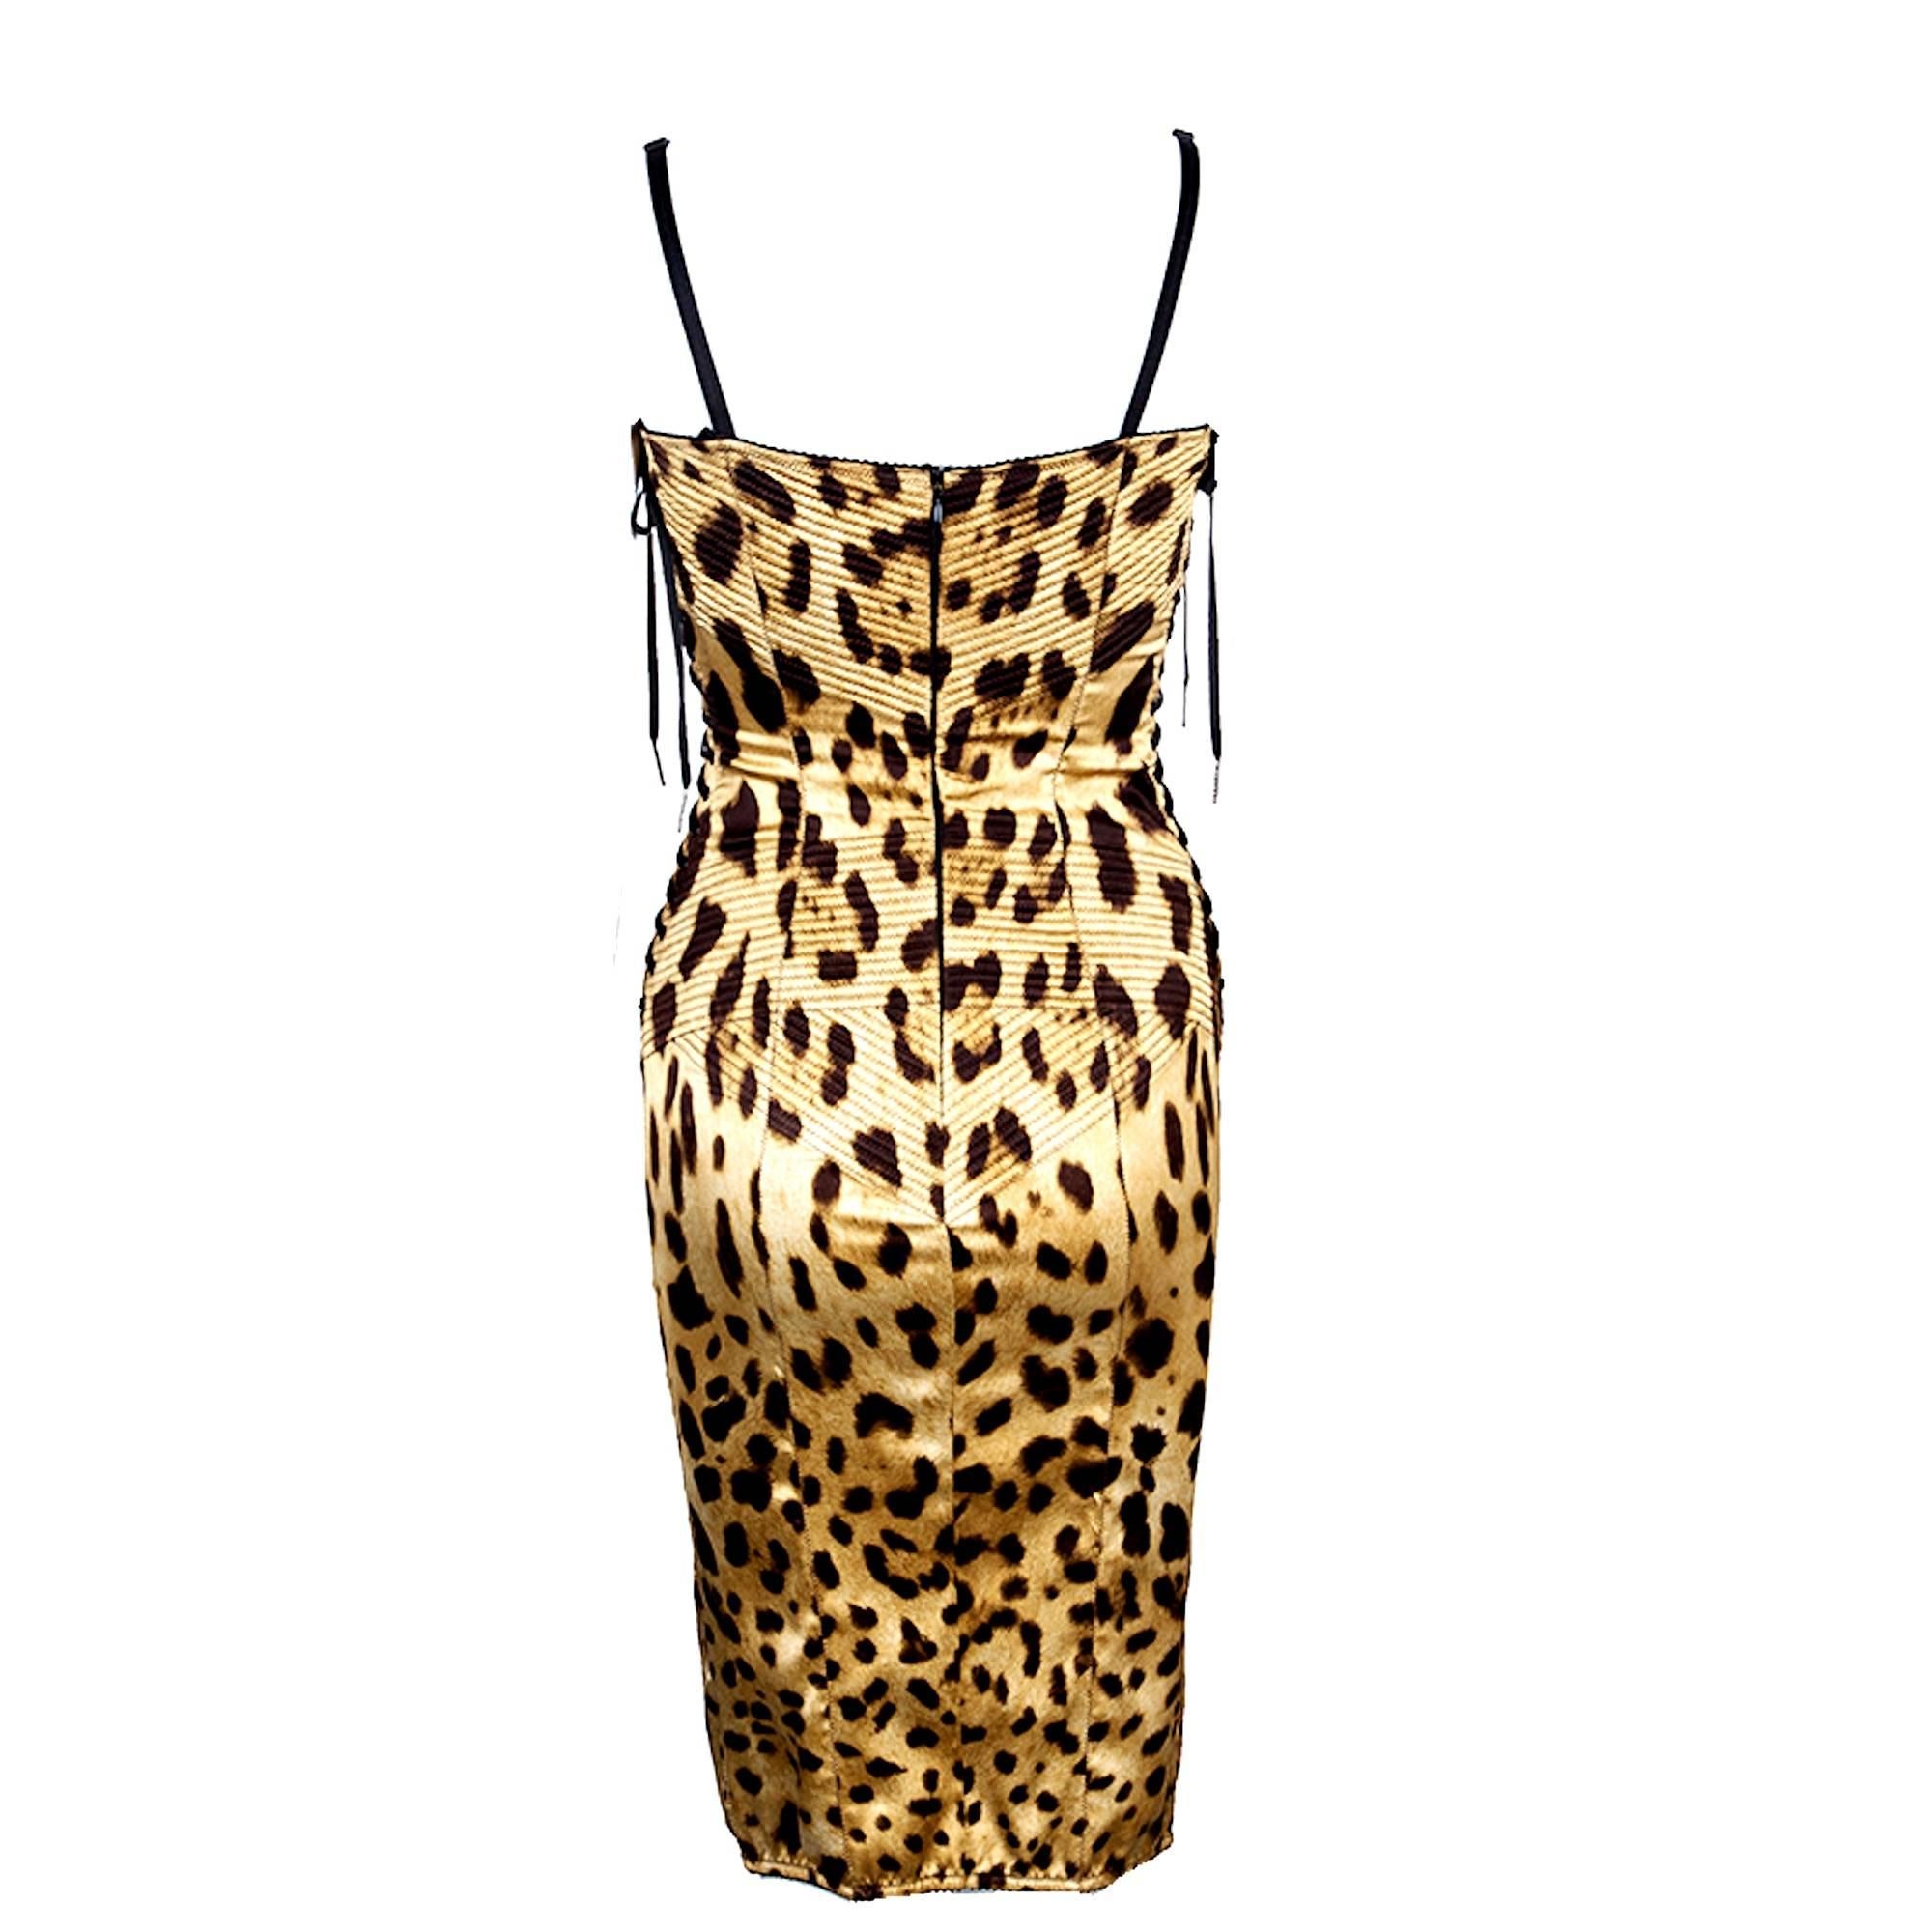 BREATHTAKING

DOLCE & GABBANA

LEOPARD ANIMAL PRINT CORSET DRESS

COLLECTOR'S PIECE

SEEN ON VICTORIA SILVSTEDT

DETAILS:

    A DOLCE & GABBANA classic signature piece that will last you for years
    Beautiful leopard printed silk
    Boned corset